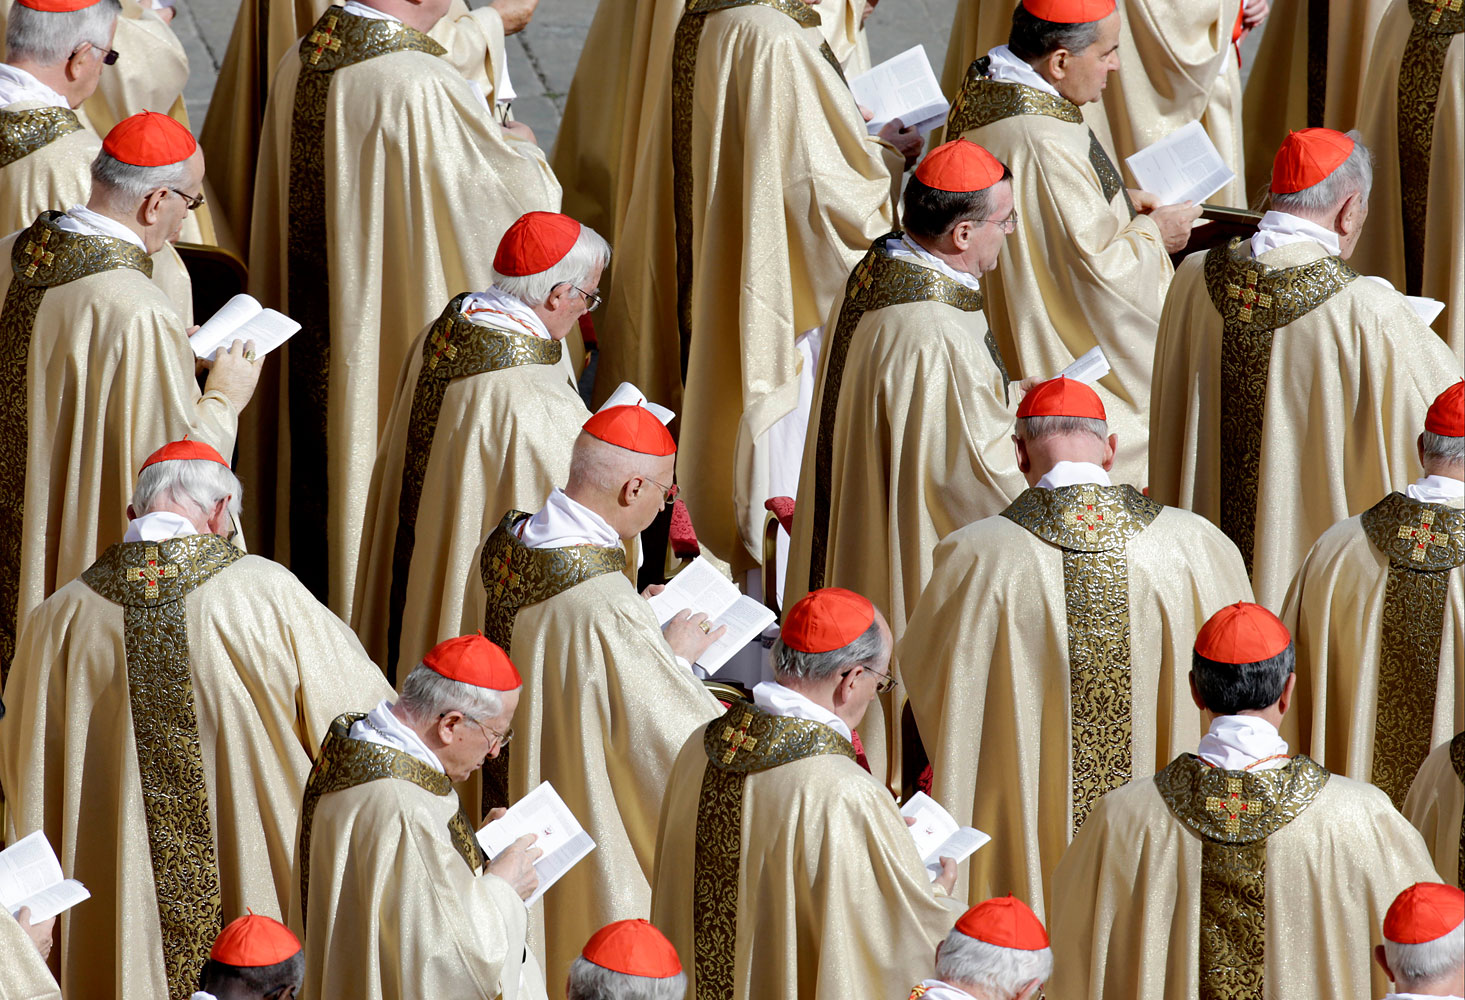 Cardinals attend Pope Francis' inaugural Mass in St. Peter's Square at the Vatican, in 2013. (Andrew Medichini / AP)